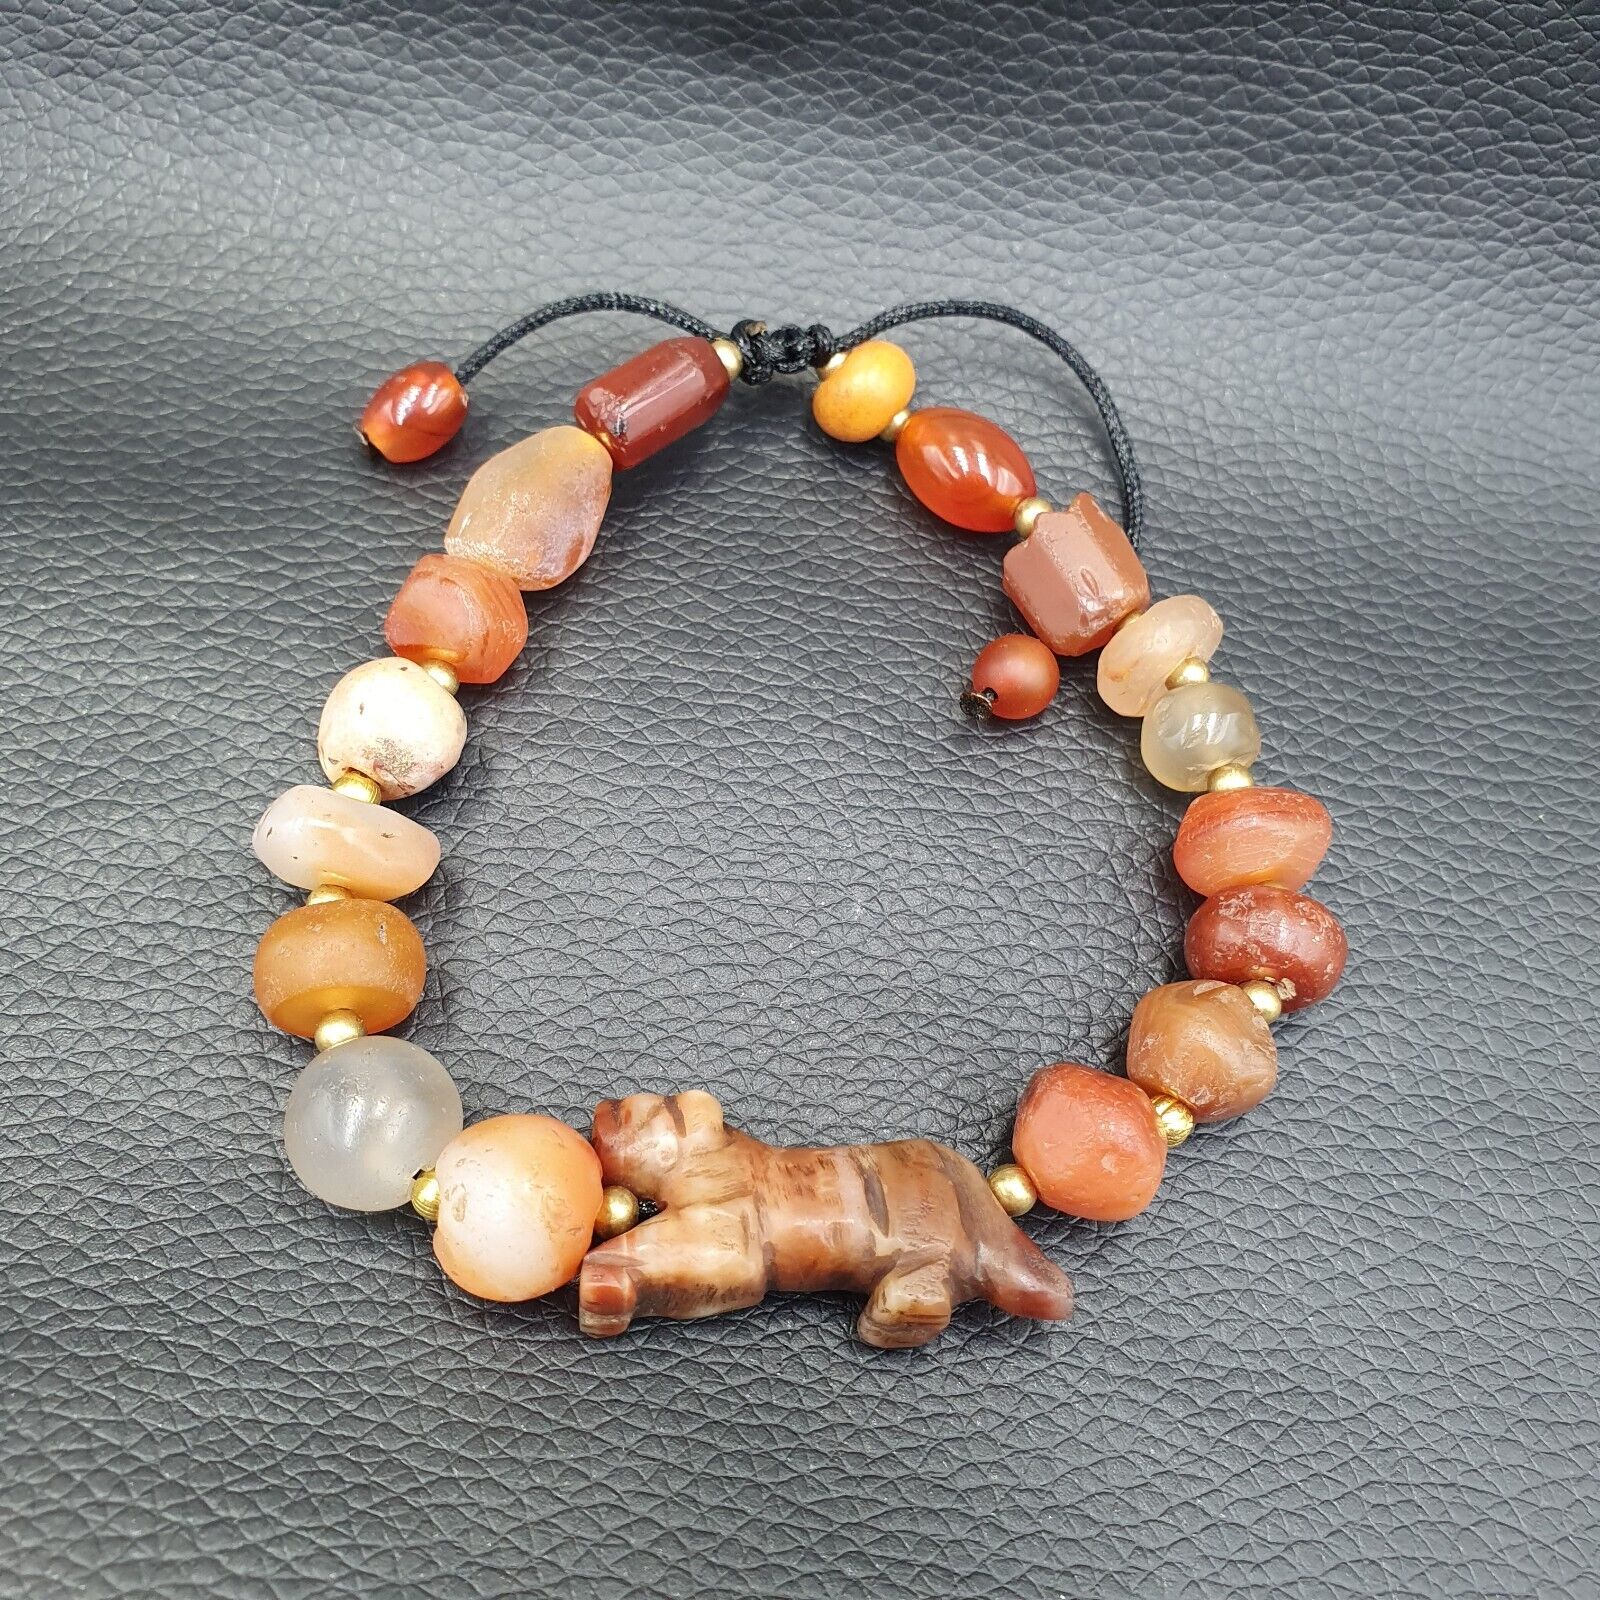 Antique Ancient Agate Animal Figurine with carnelian Agate Beads Bracelet